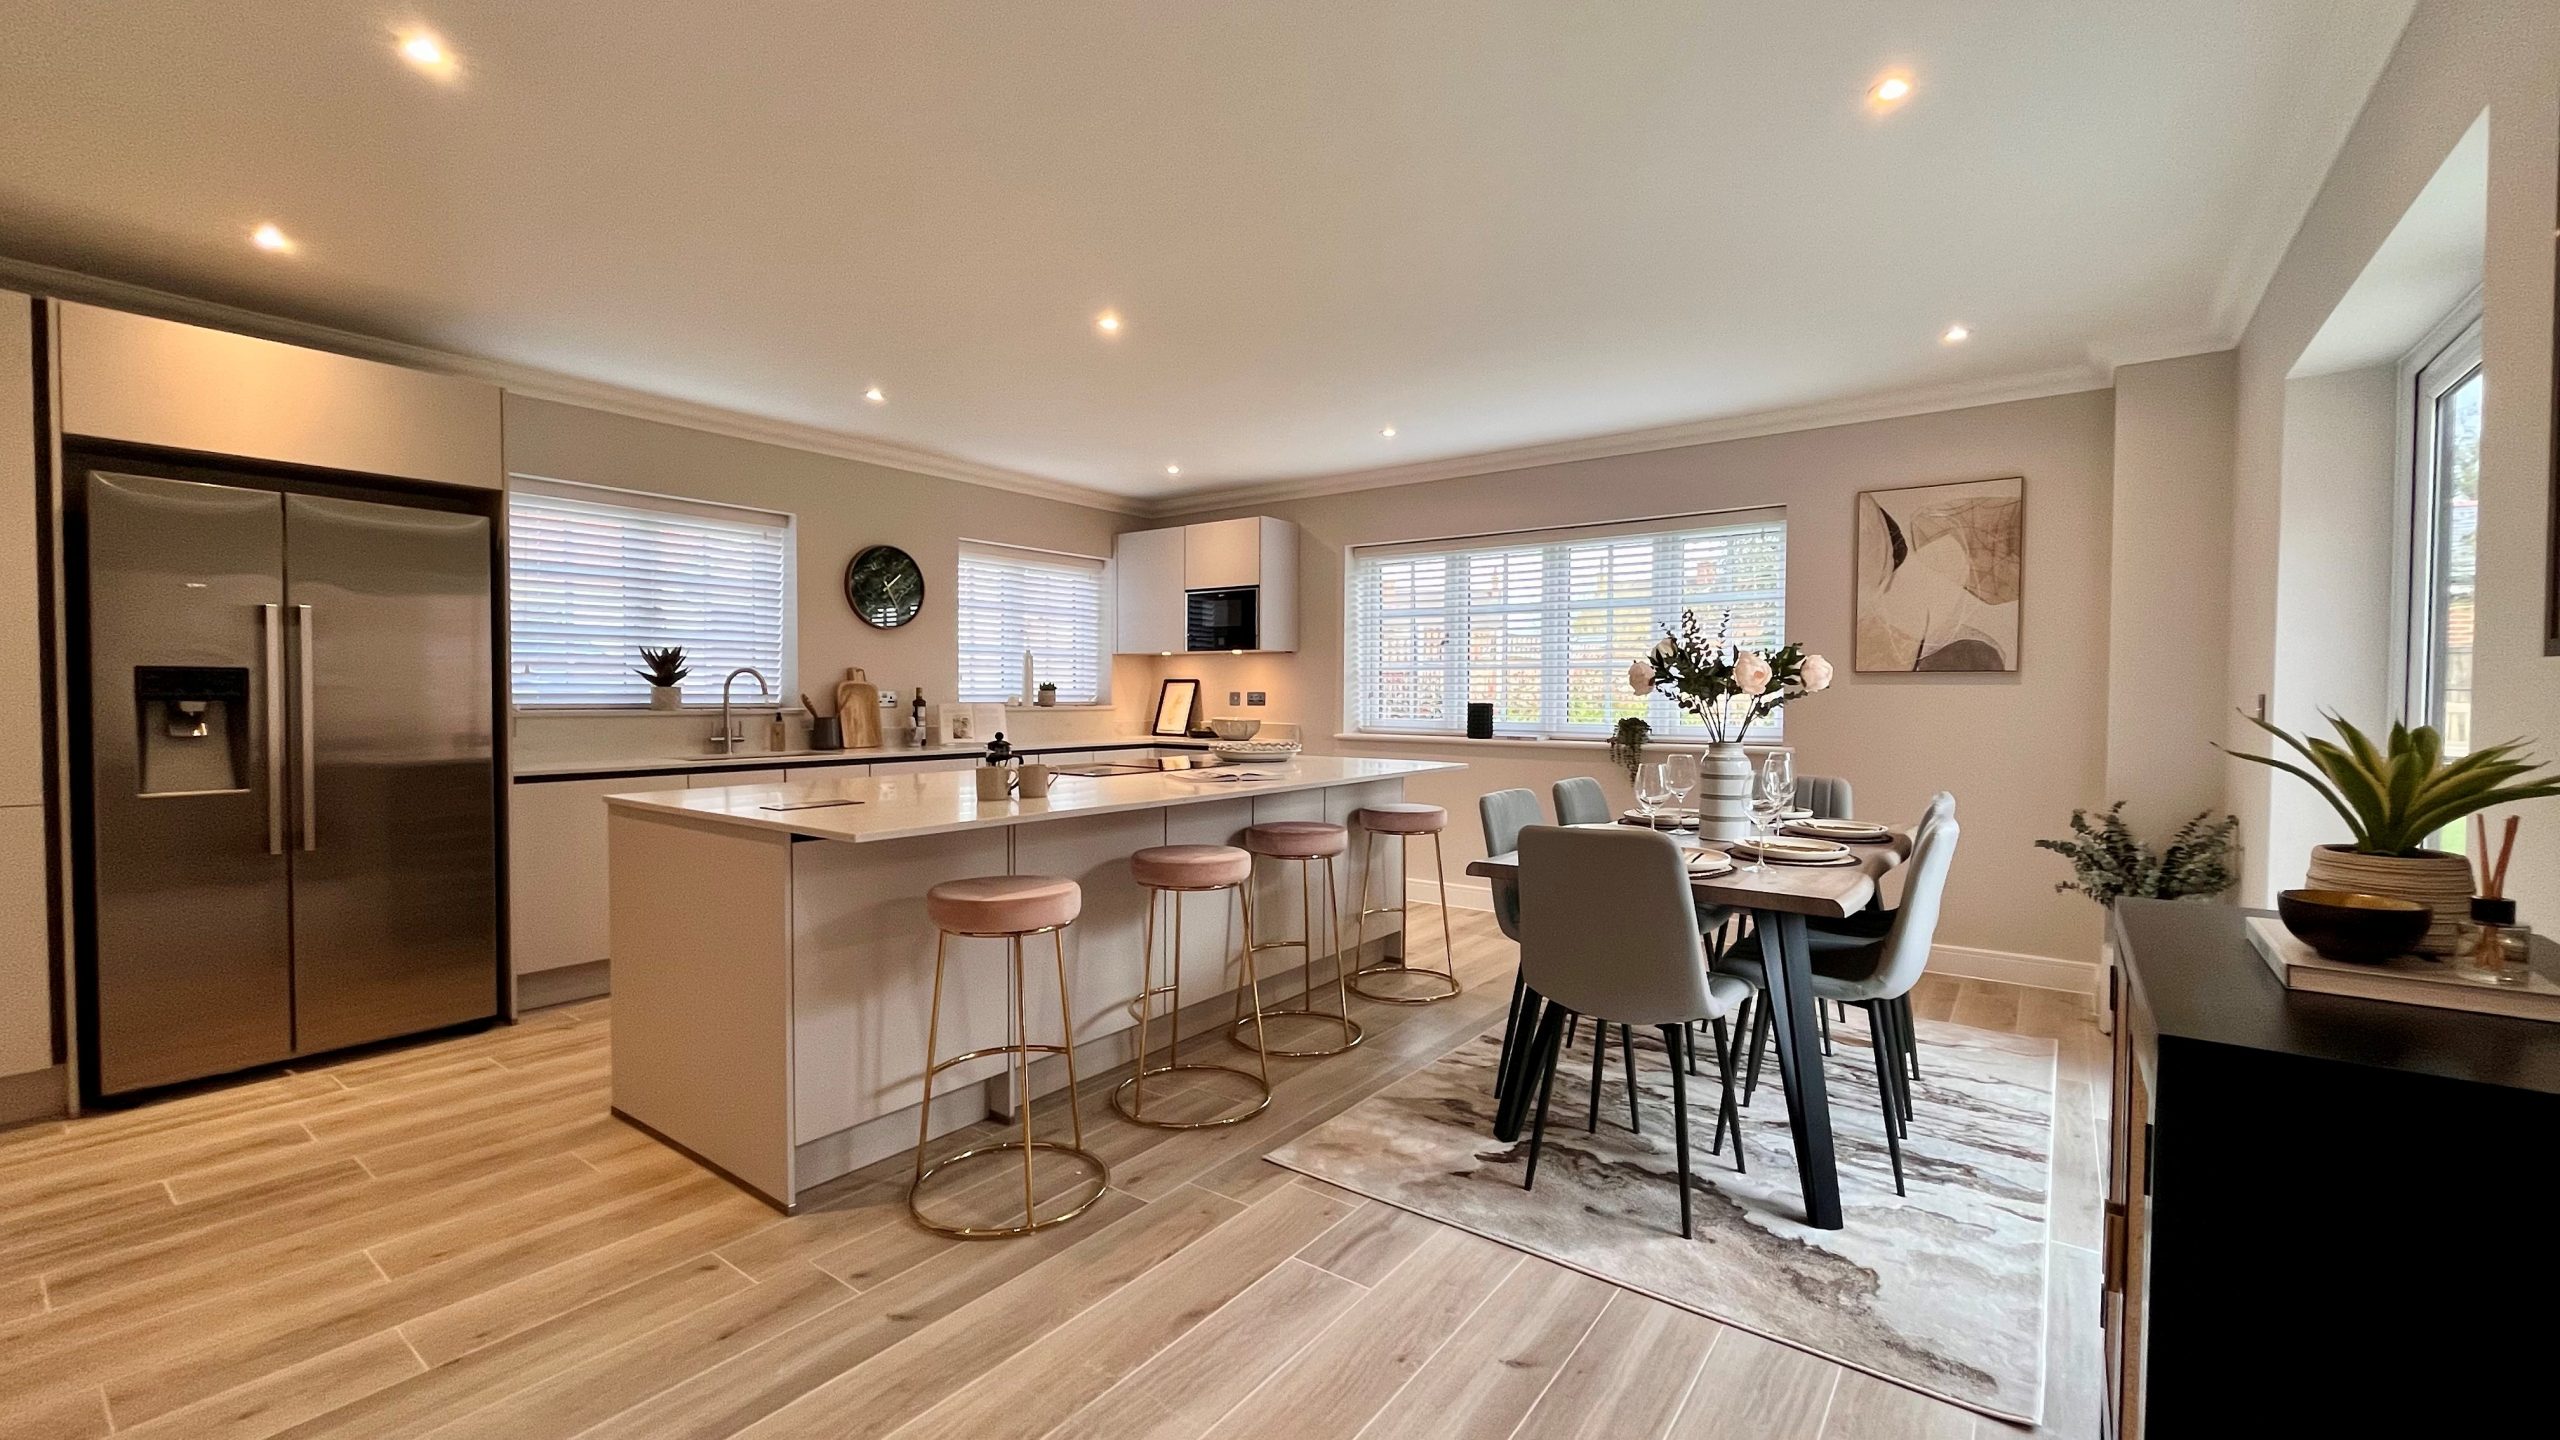 White worktop kitchen with spotlights and wooden dining table on a rug